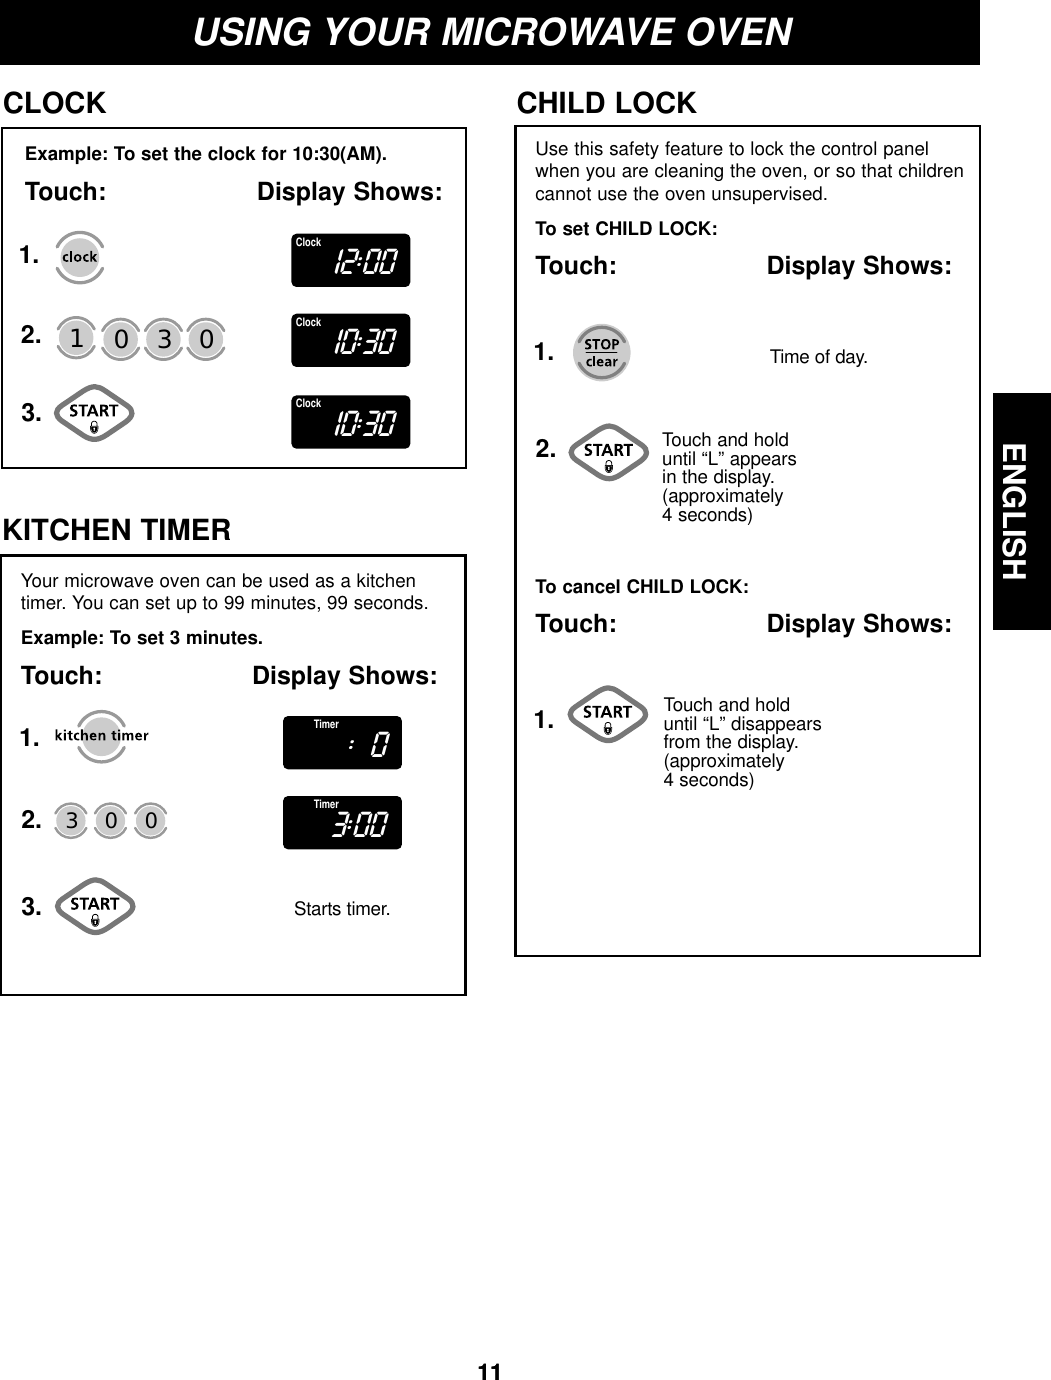 ENGLISH11ENGLISH11USING YOUR MICROWAVE OVENExample: To set the clock for 10:30(AM).Touch: Display Shows:CLOCK1.2.3.Use this safety feature to lock the control panelwhen you are cleaning the oven, or so that childrencannot use the oven unsupervised.To set CHILD LOCK:Touch: Display Shows:CHILD LOCKTouch and hold until “L” appears in the display.(approximately 4 seconds)To cancel CHILD LOCK:Touch: Display Shows:Touch and hold until “L” disappearsfrom the display. (approximately 4 seconds)Time of day.130 01.1.2.Your microwave oven can be used as a kitchentimer. You can set up to 99 minutes, 99 seconds.Example: To set 3 minutes.Touch: Display Shows:KITCHEN TIMERStarts timer.30 01.2.3.12:00Clock10:30Clock10:30Clock:0Timer3:00Timer